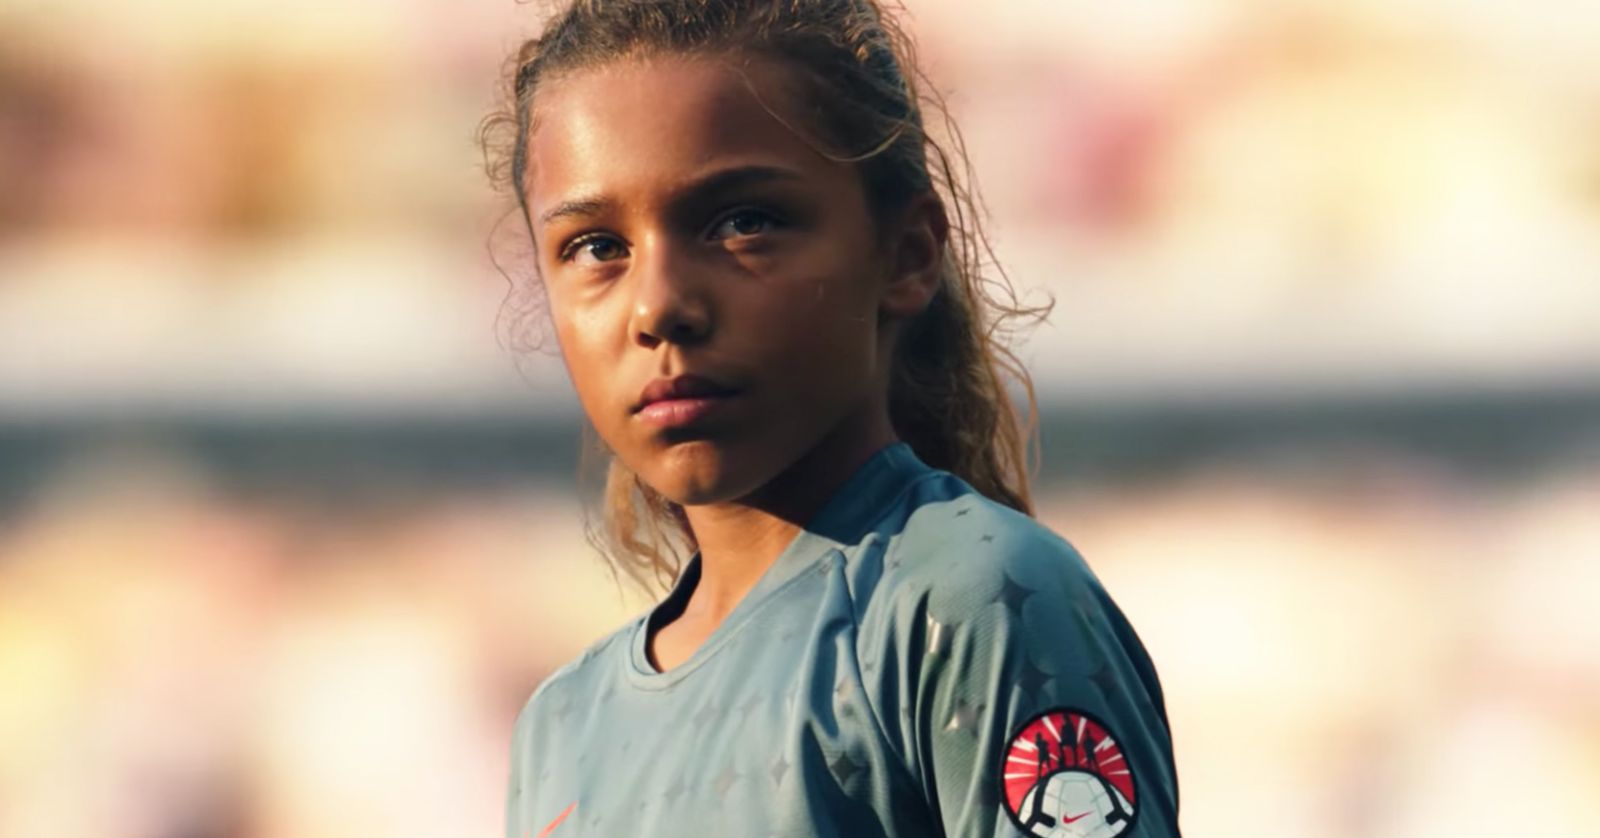 nike world cup commercial 2019 i believe